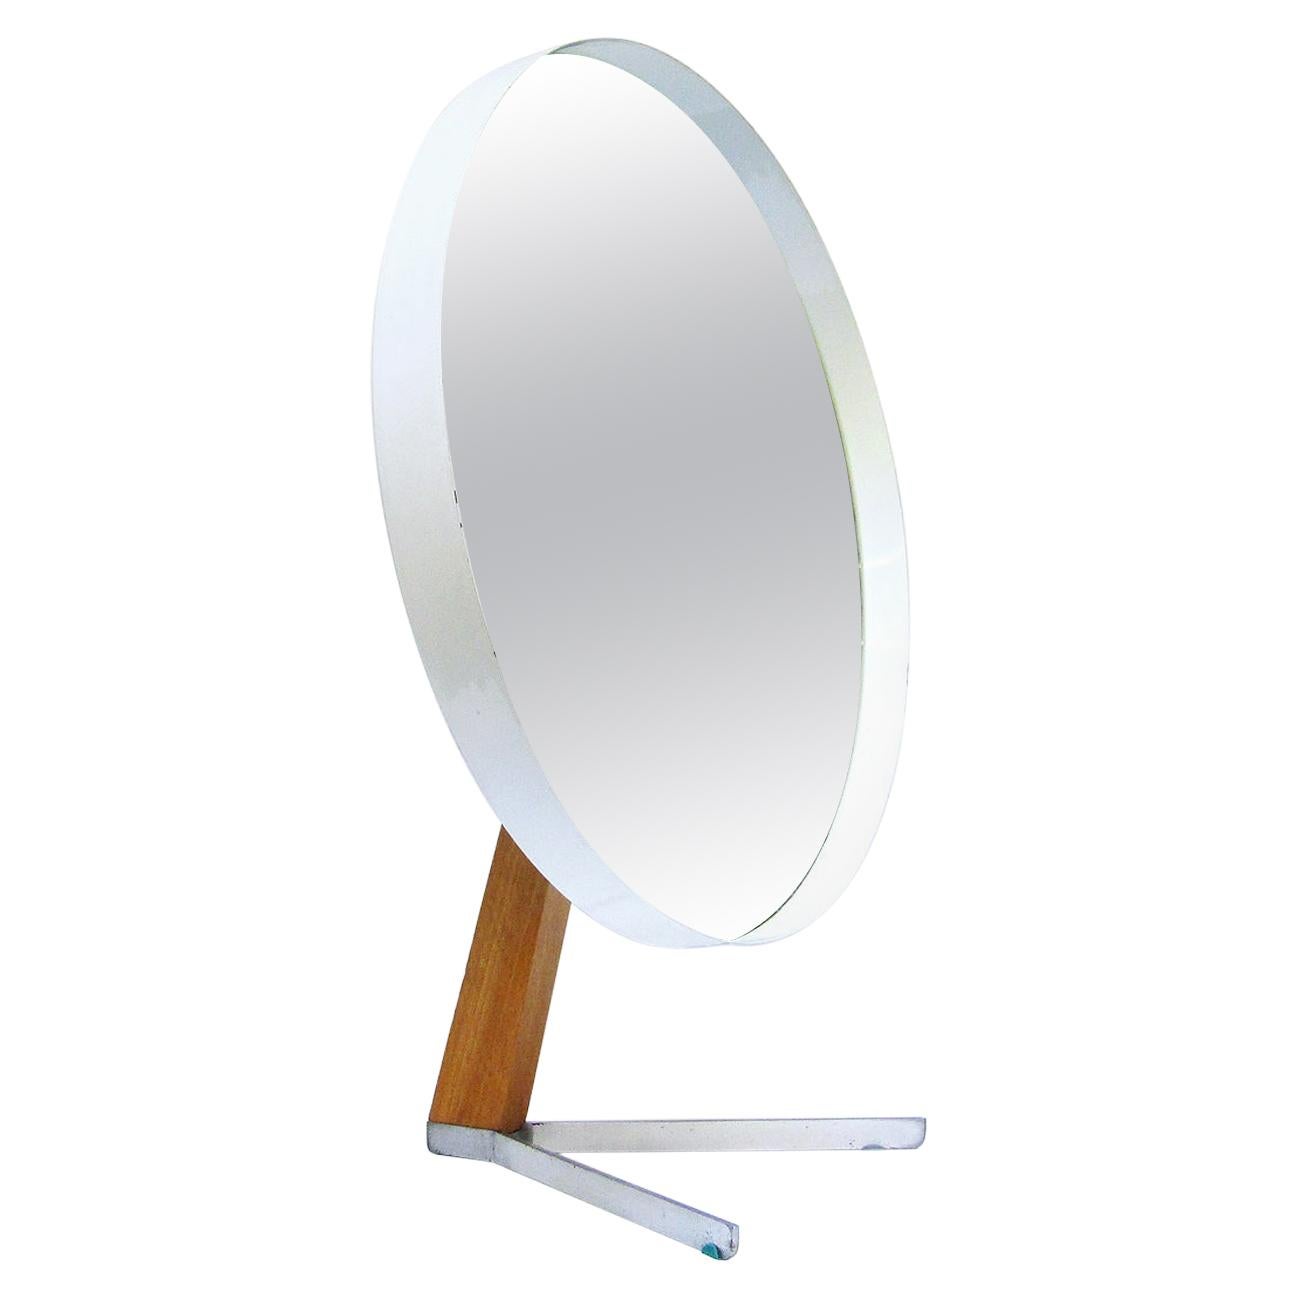 Large Round Minimalist 1960s Table Mirror by Robert Welch for Durlston Designs For Sale